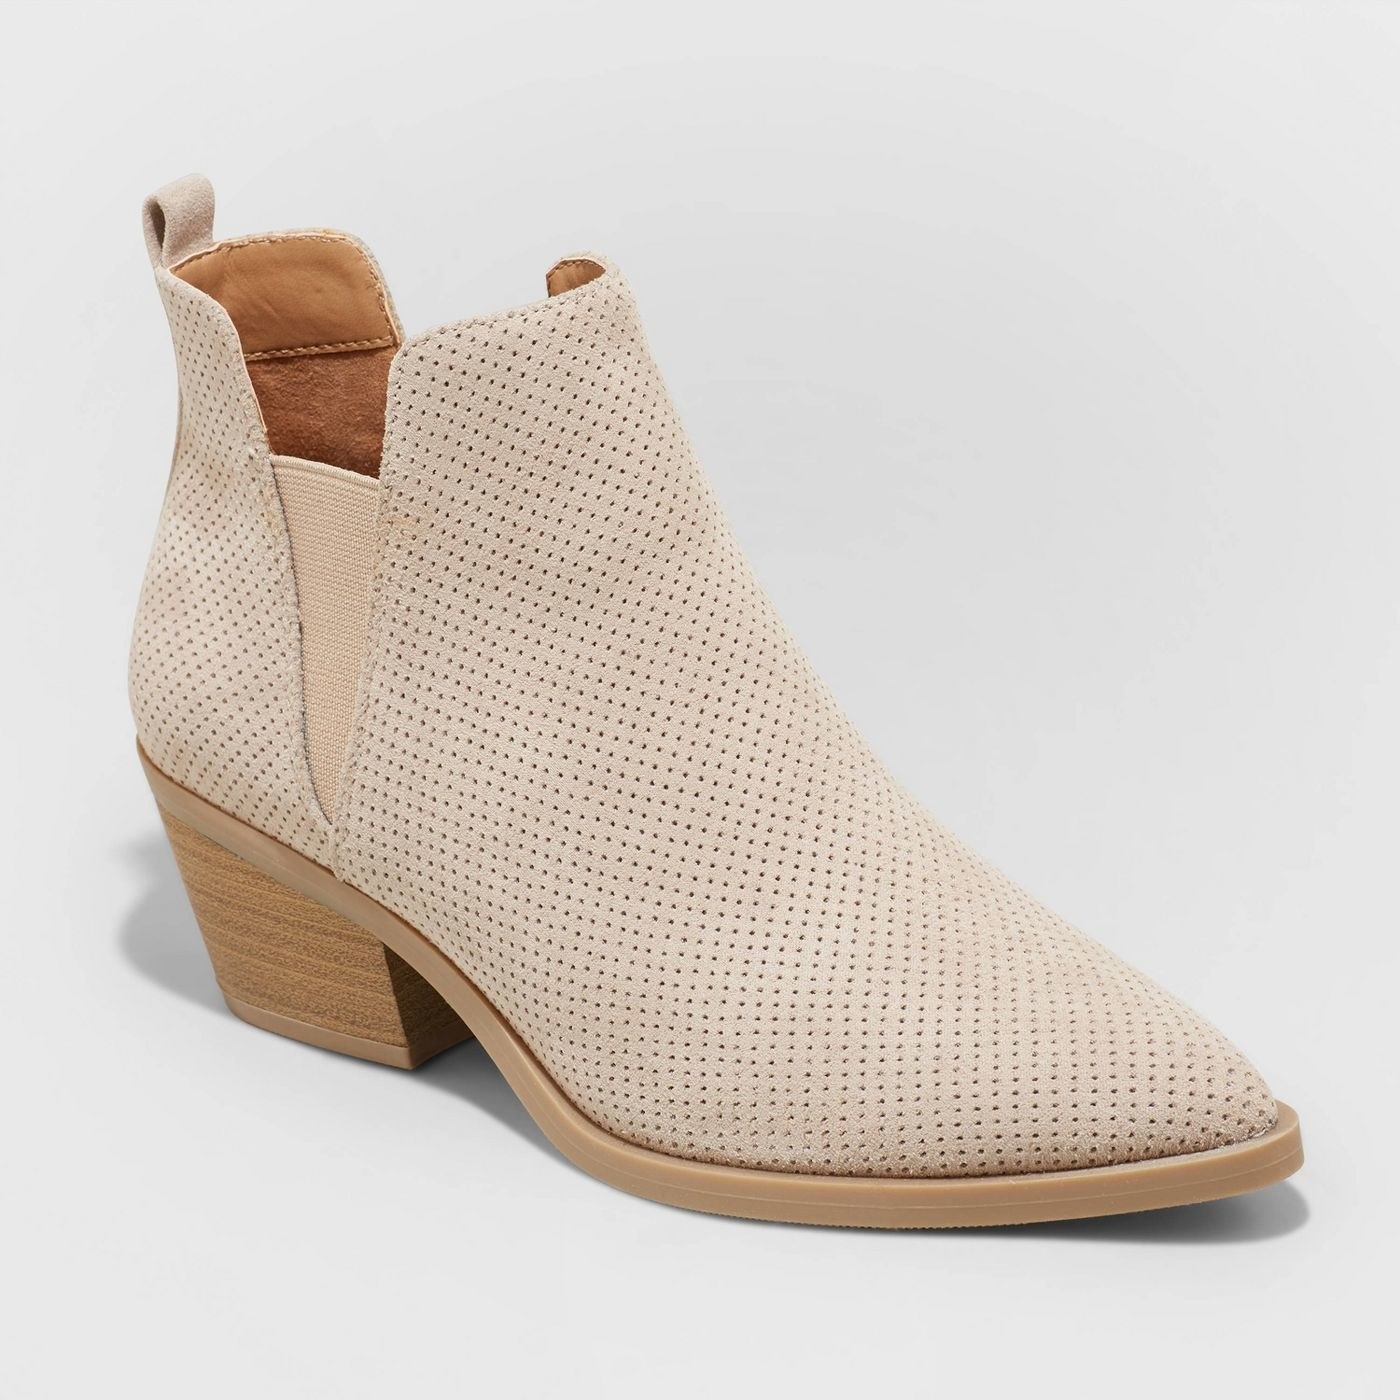 taupe colored ankle boots